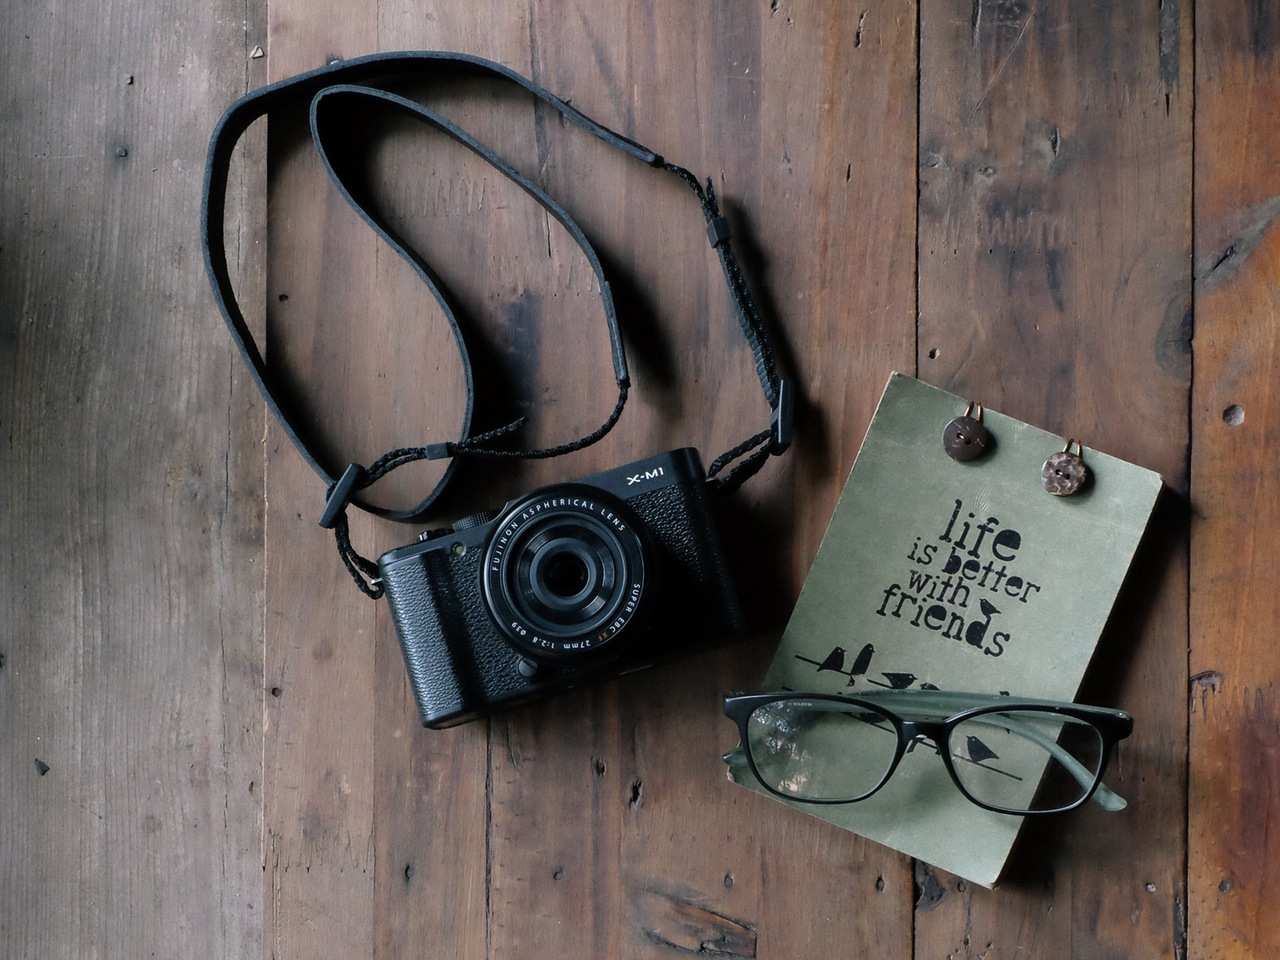 An image of a camera, glasses and a postcard